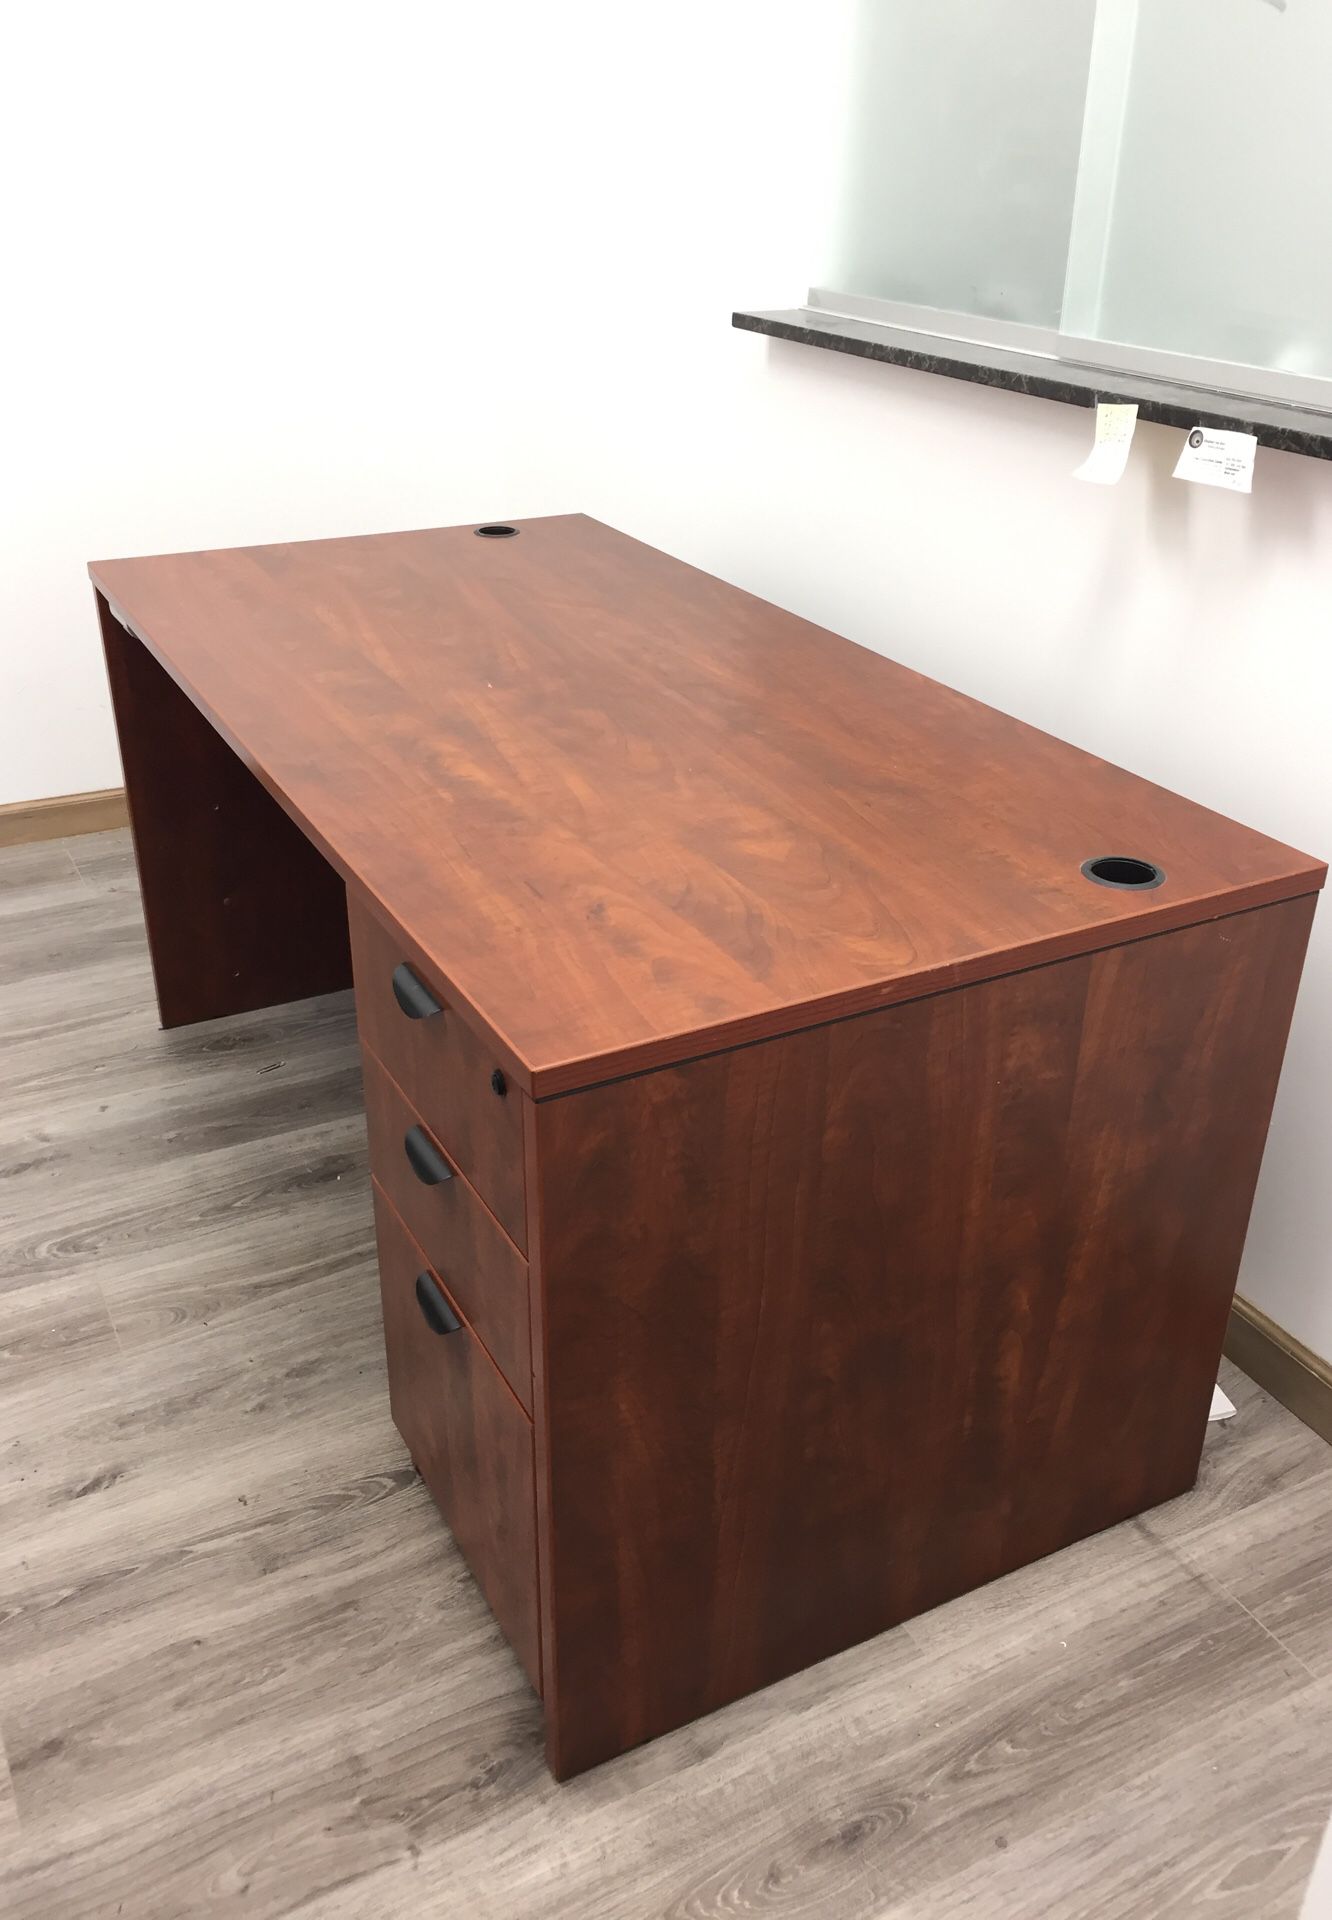 Three secretarial desks available, two with return sides